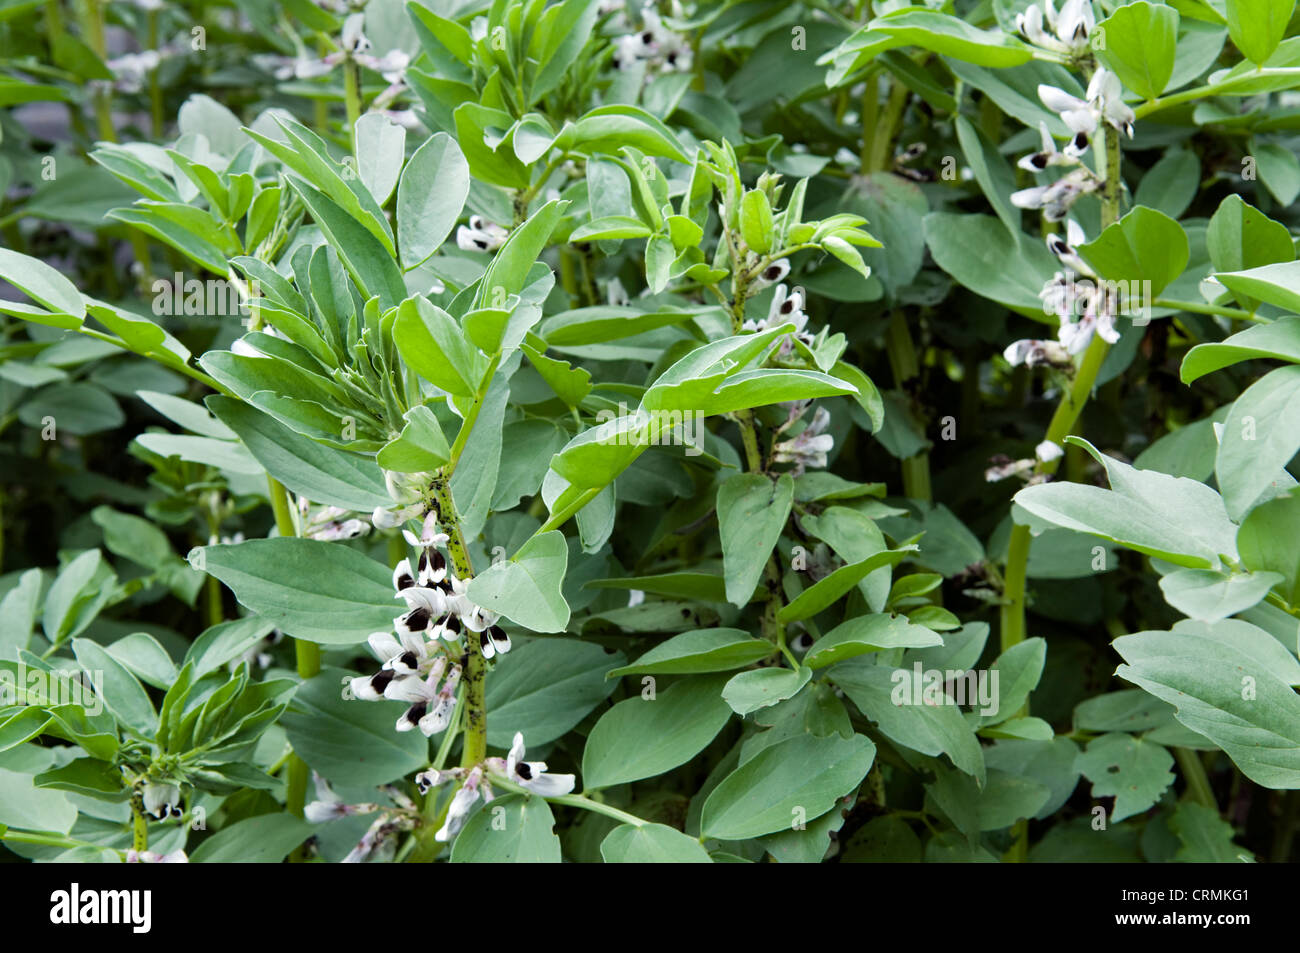 Broad bean plant with black fly on growing in garden Stock Photo